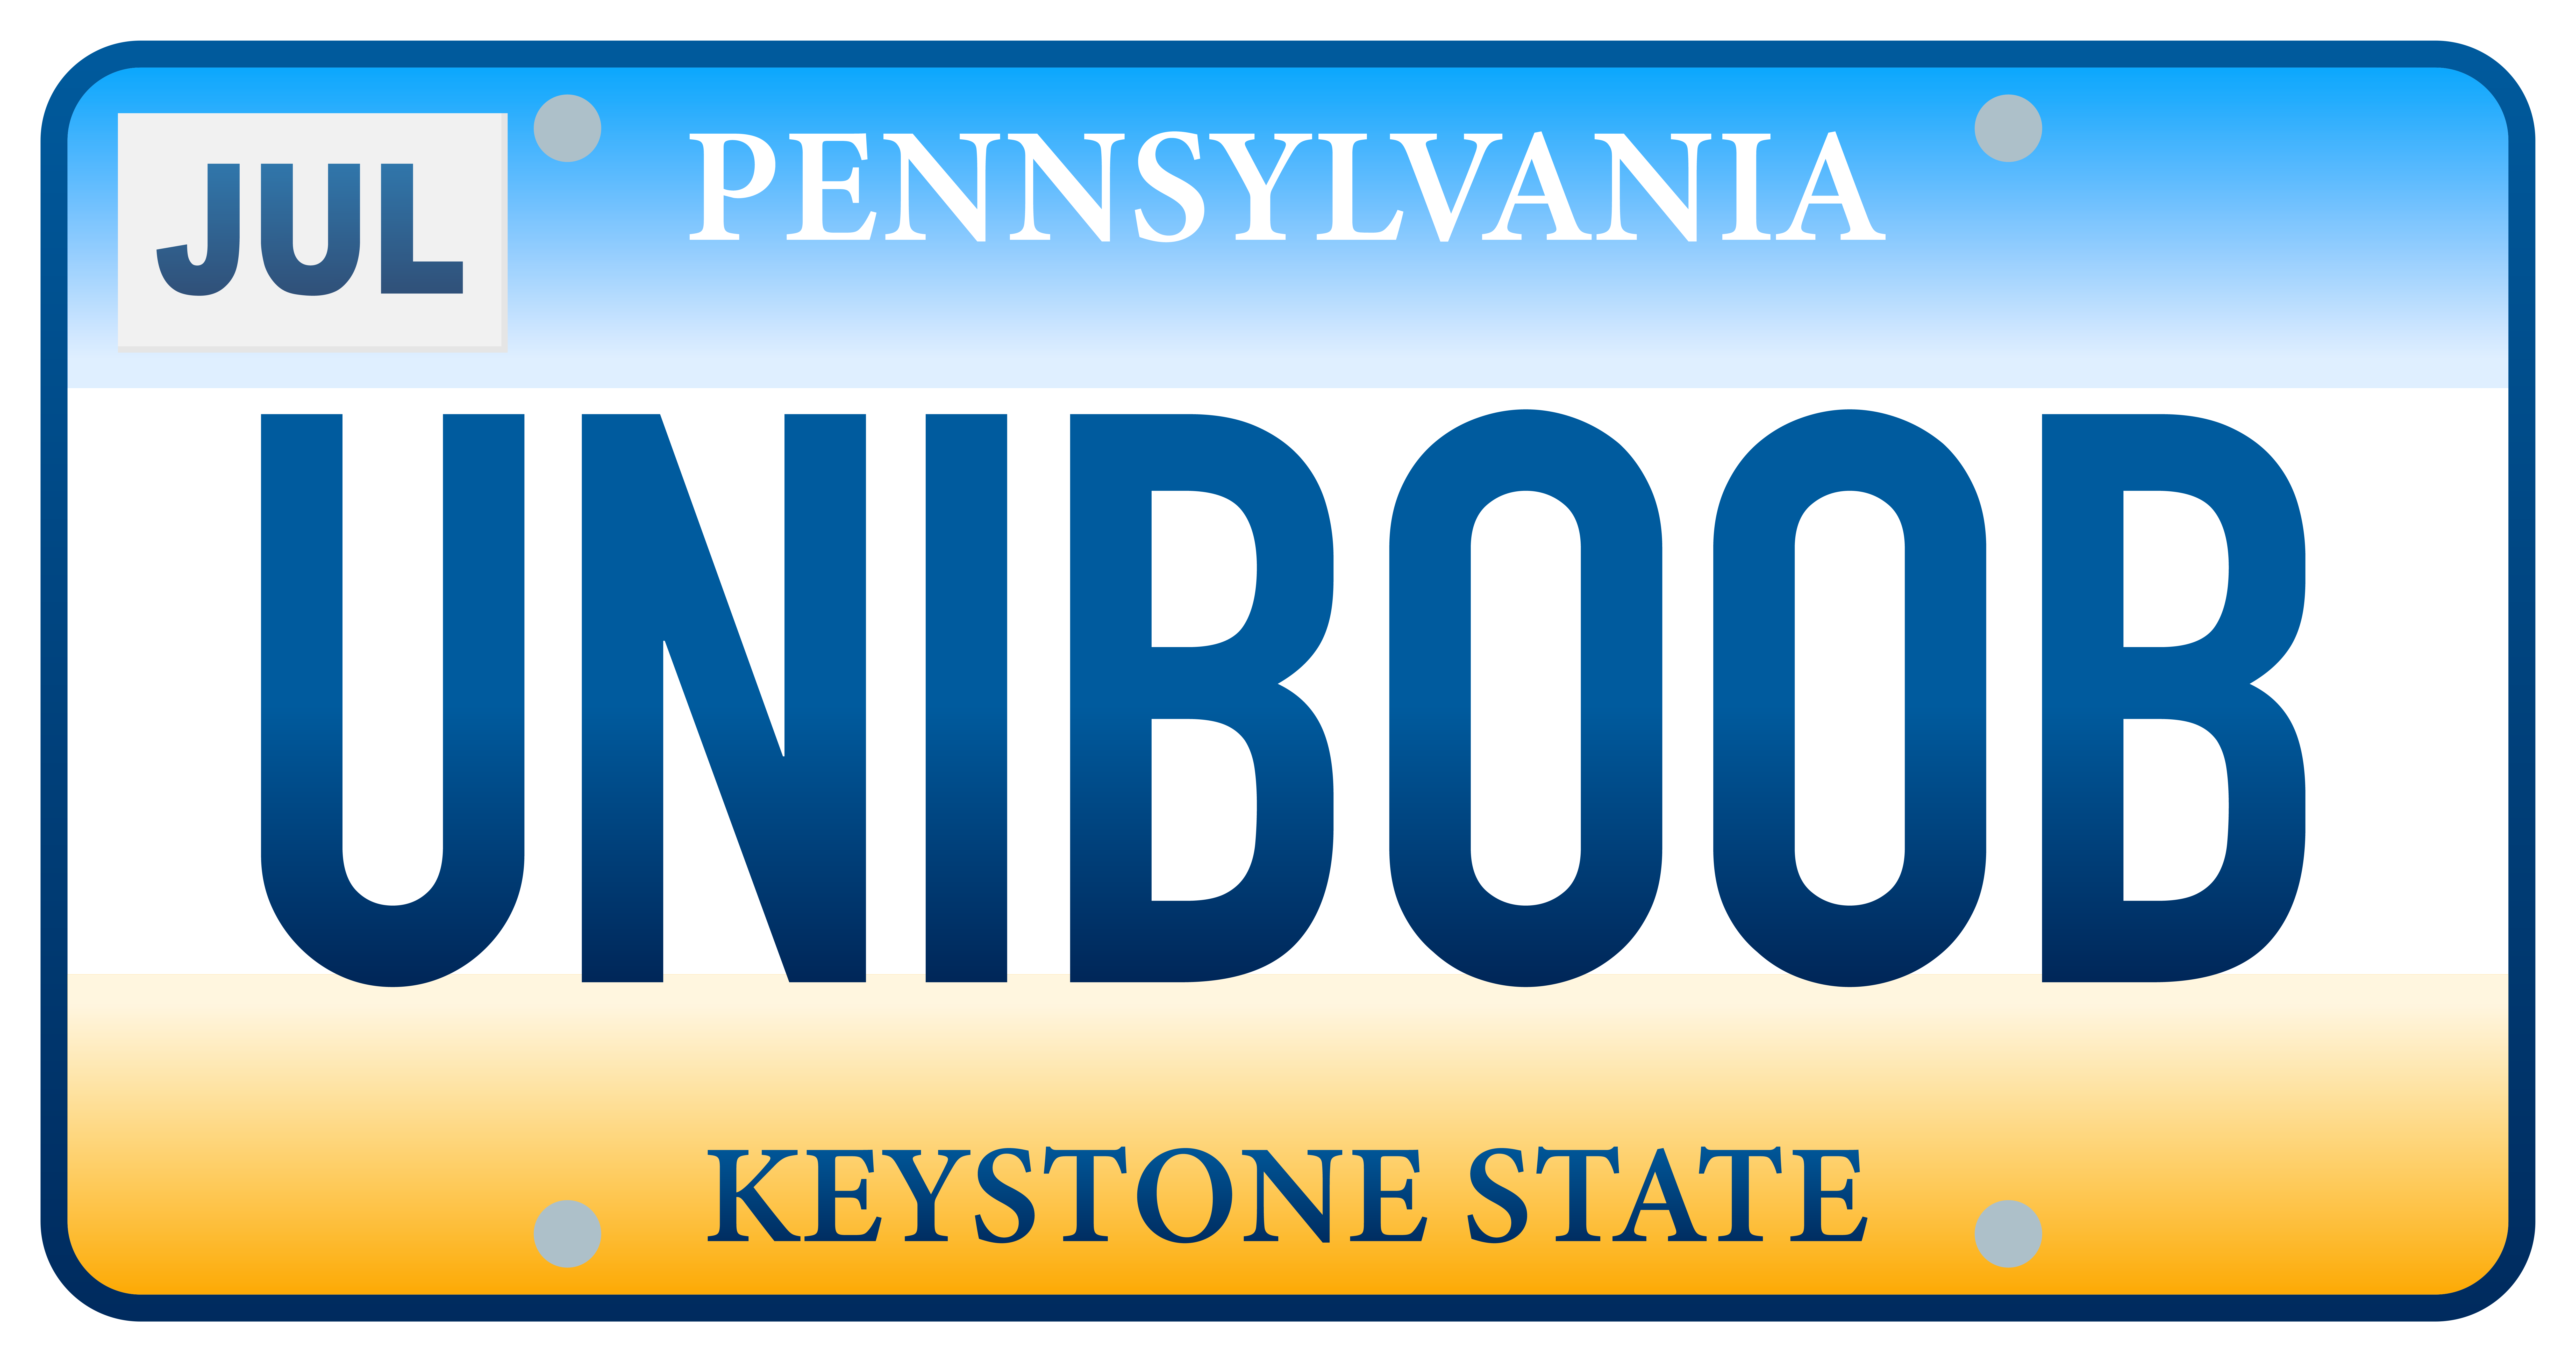 It’s obvious that PennDOT doesn’t appreciate truth-telling plates, UNIBOOB aside.